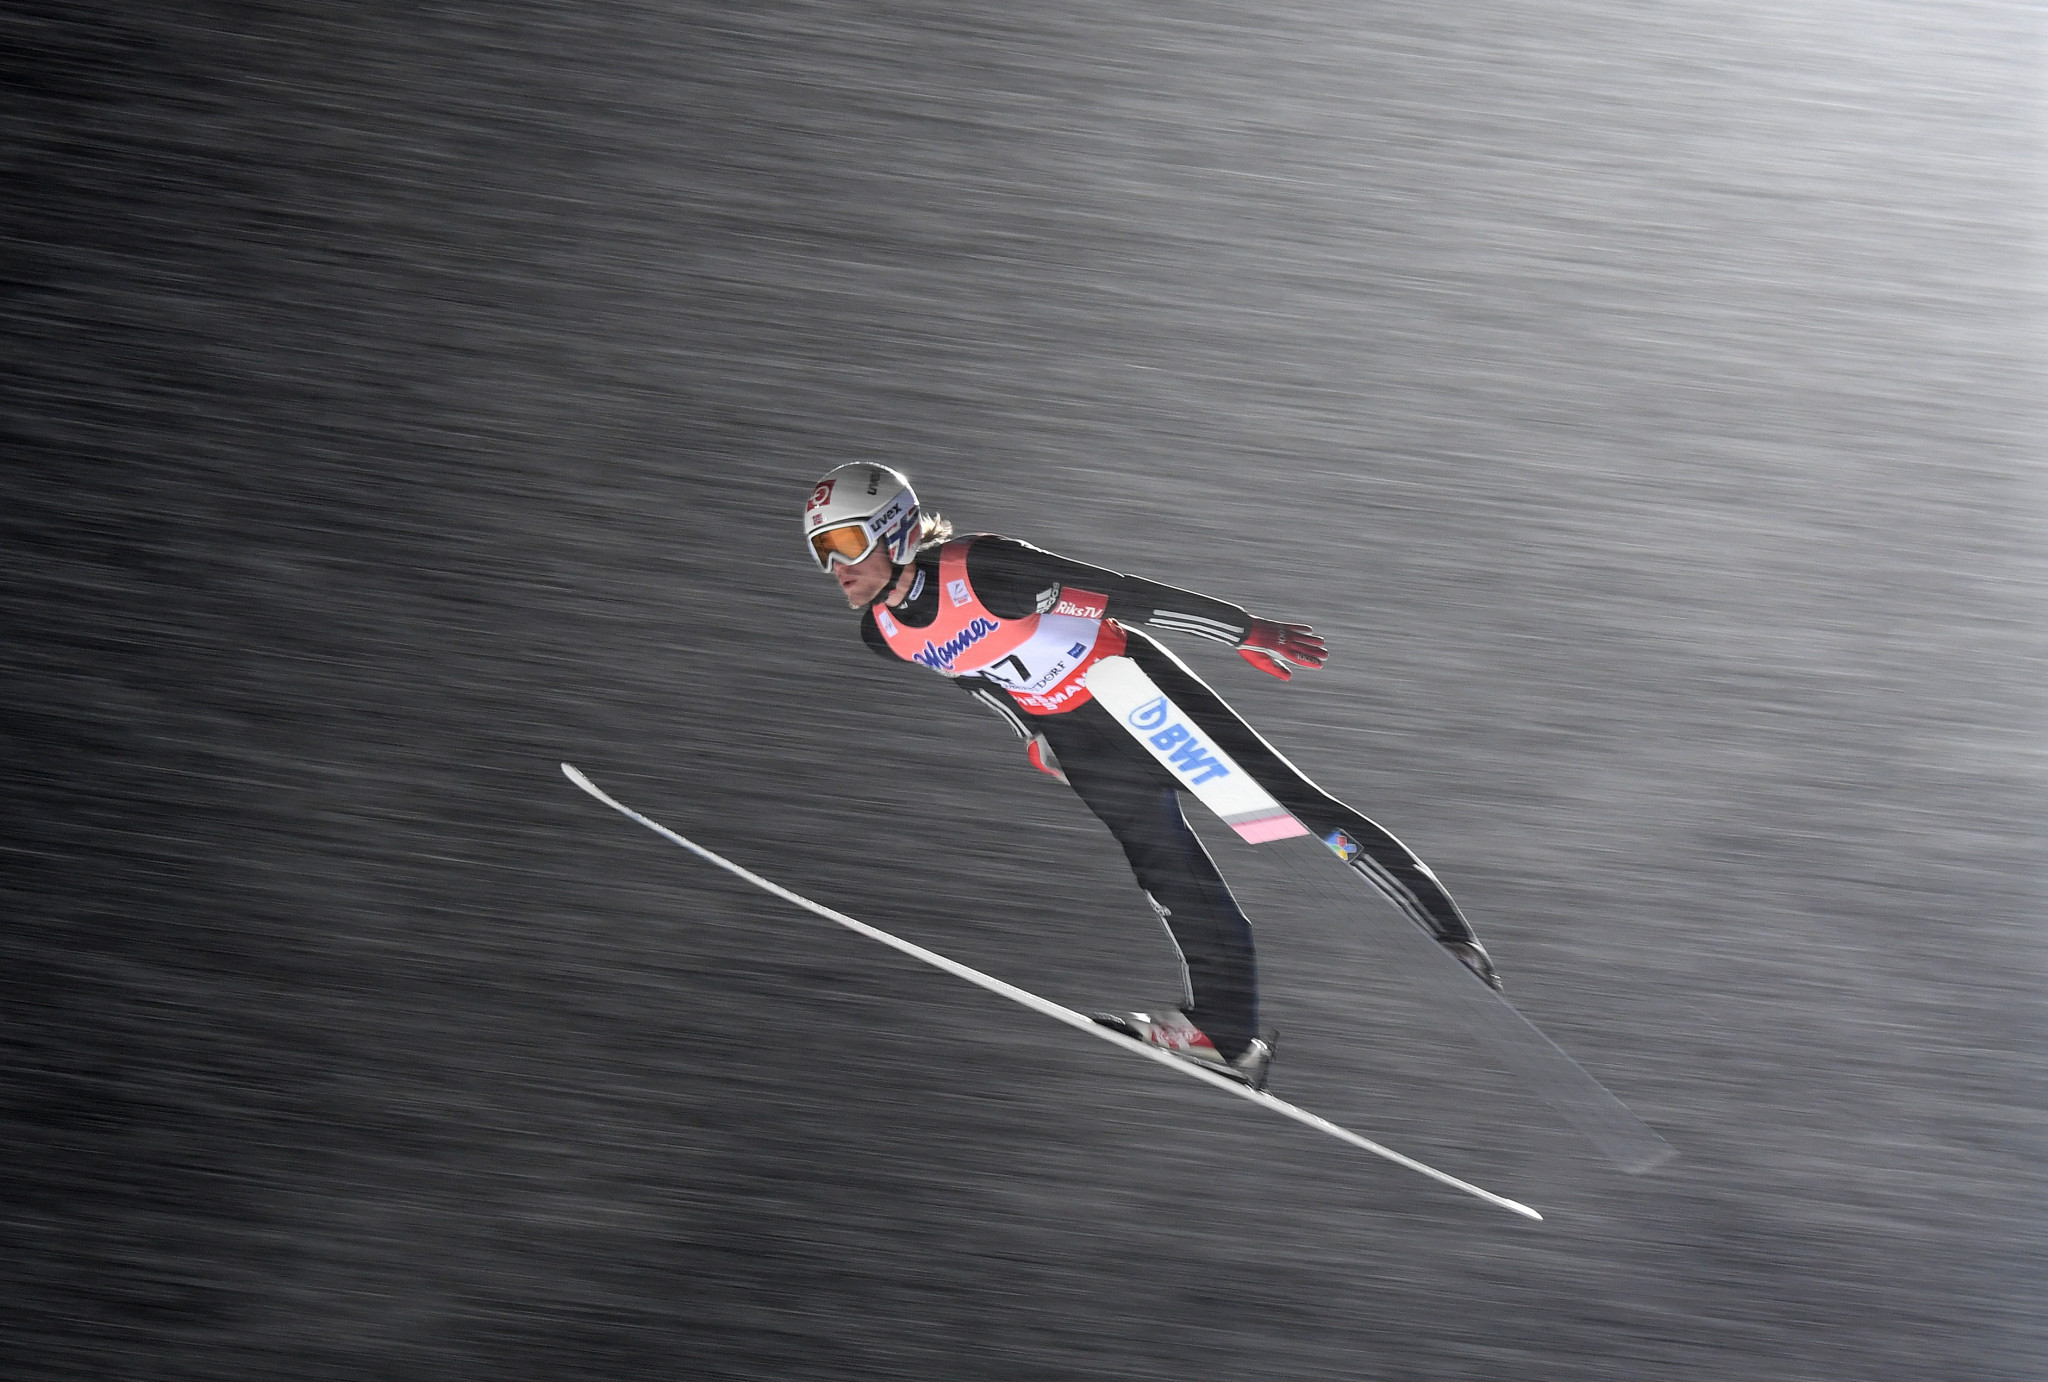 Tande leads at halfway stage of individual event at FIS Ski Flying World Championships